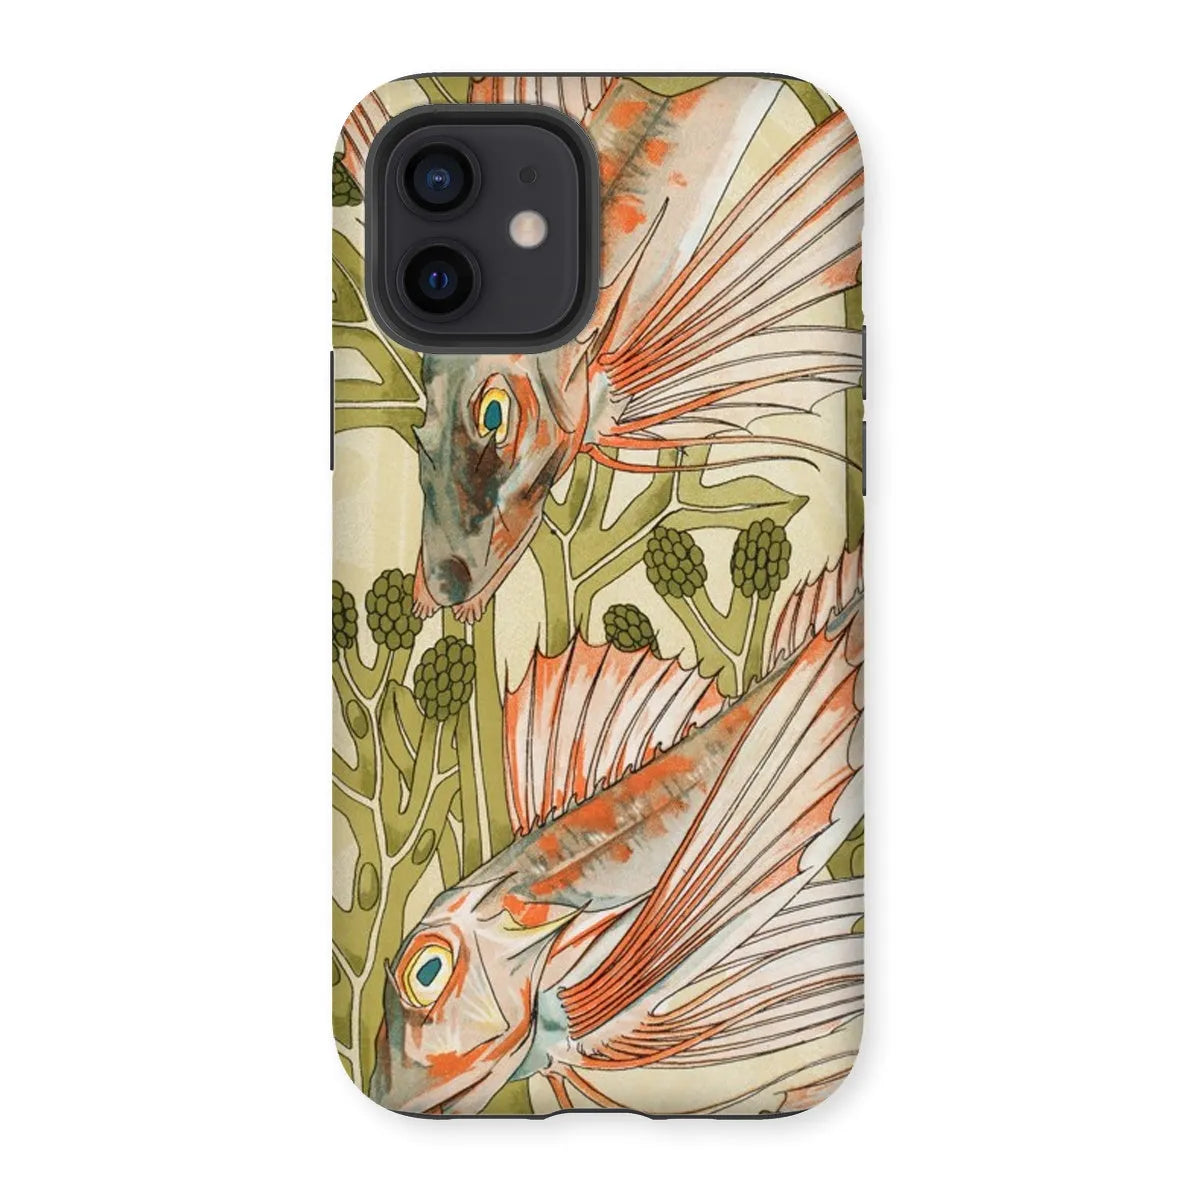 Red Fish - Animal Art Phone Case - Maurice Pillard Verneuil - Iphone 12 / Matte - Mobile Phone Cases - Aesthetic Art